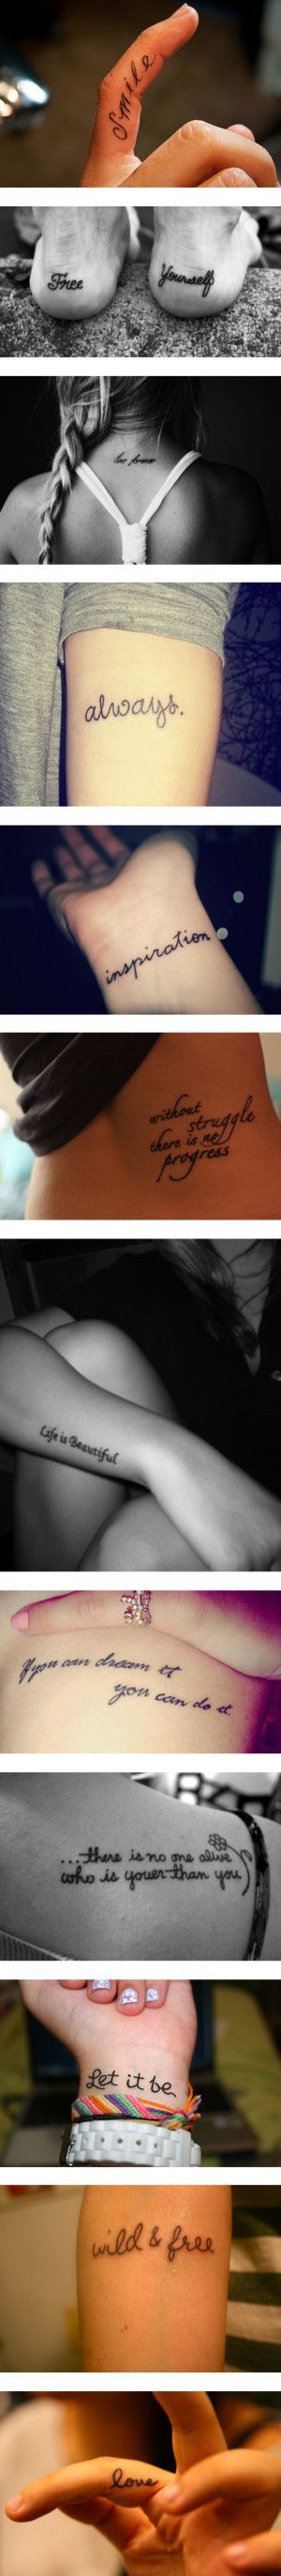 If i ever get a tatoo it will be an awesome quote like these